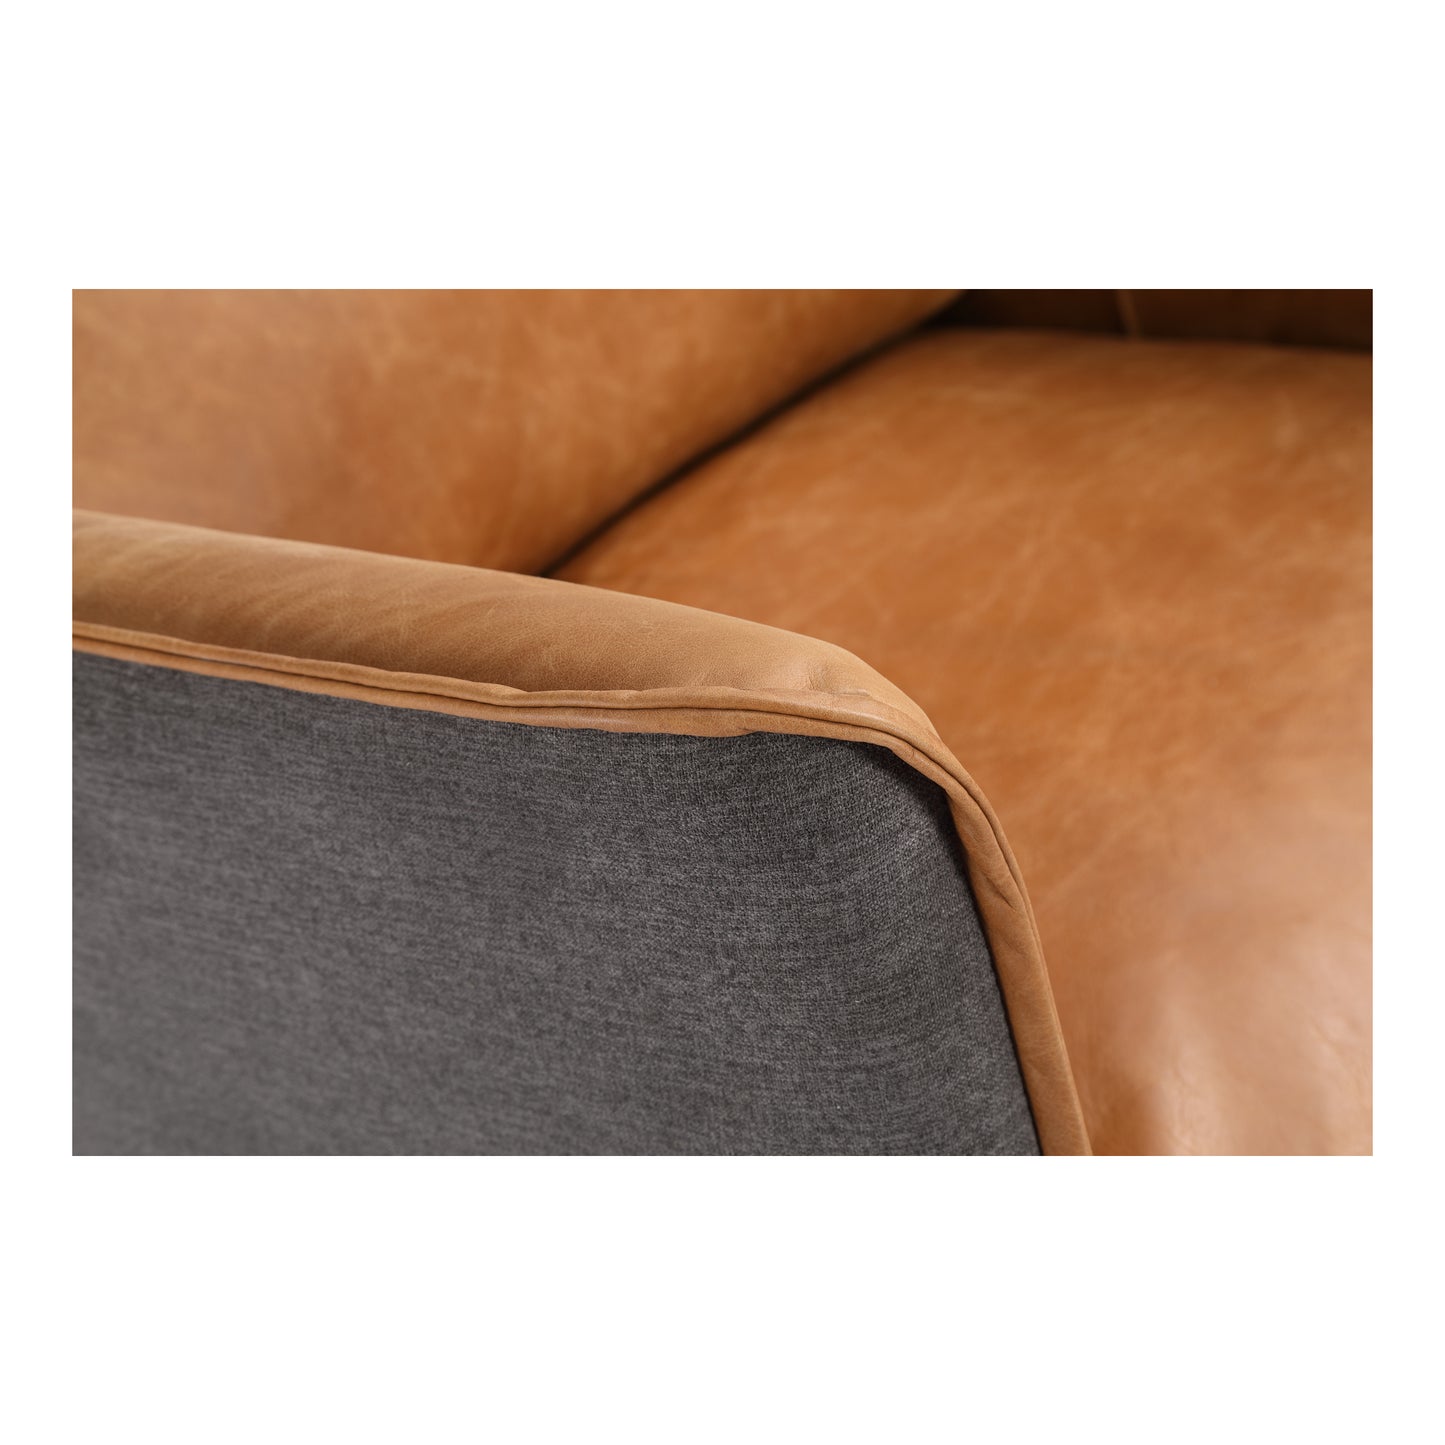 Messina Leather Armchair